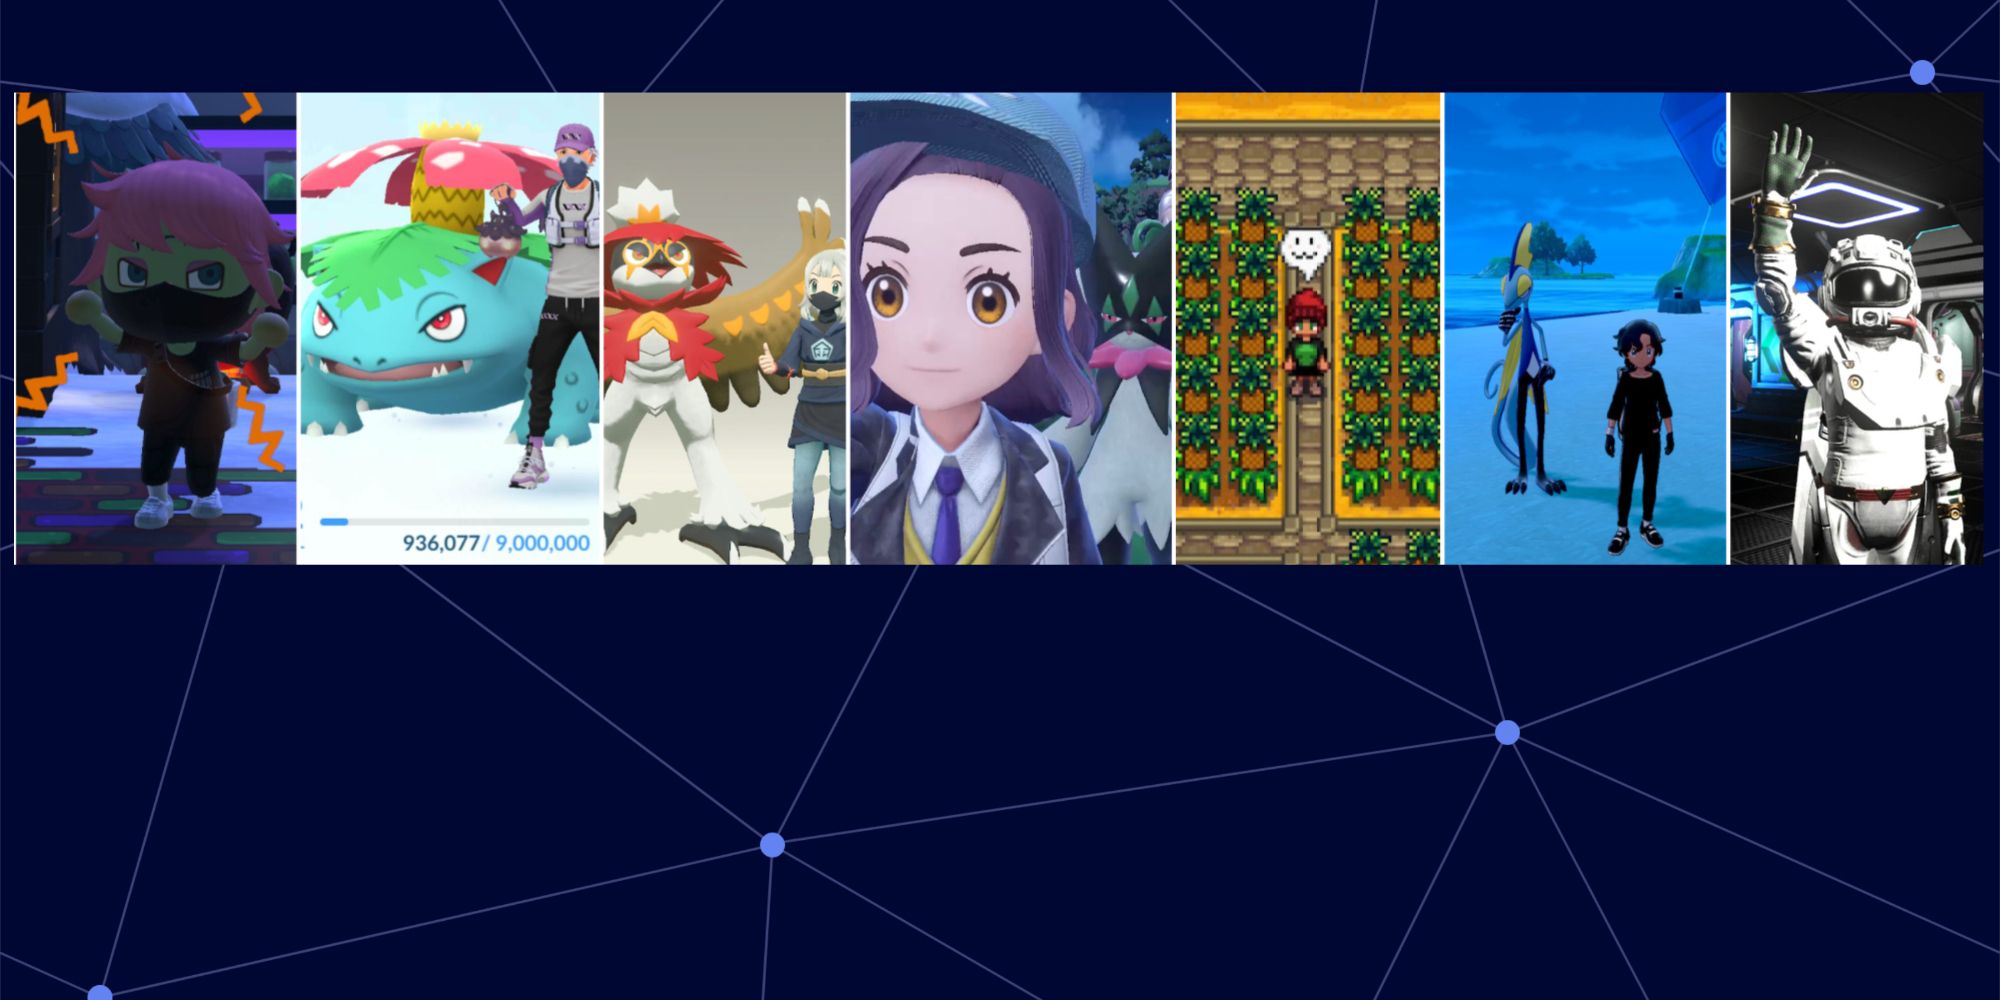 I made a collage image with all Digimon that I want in the Digimon